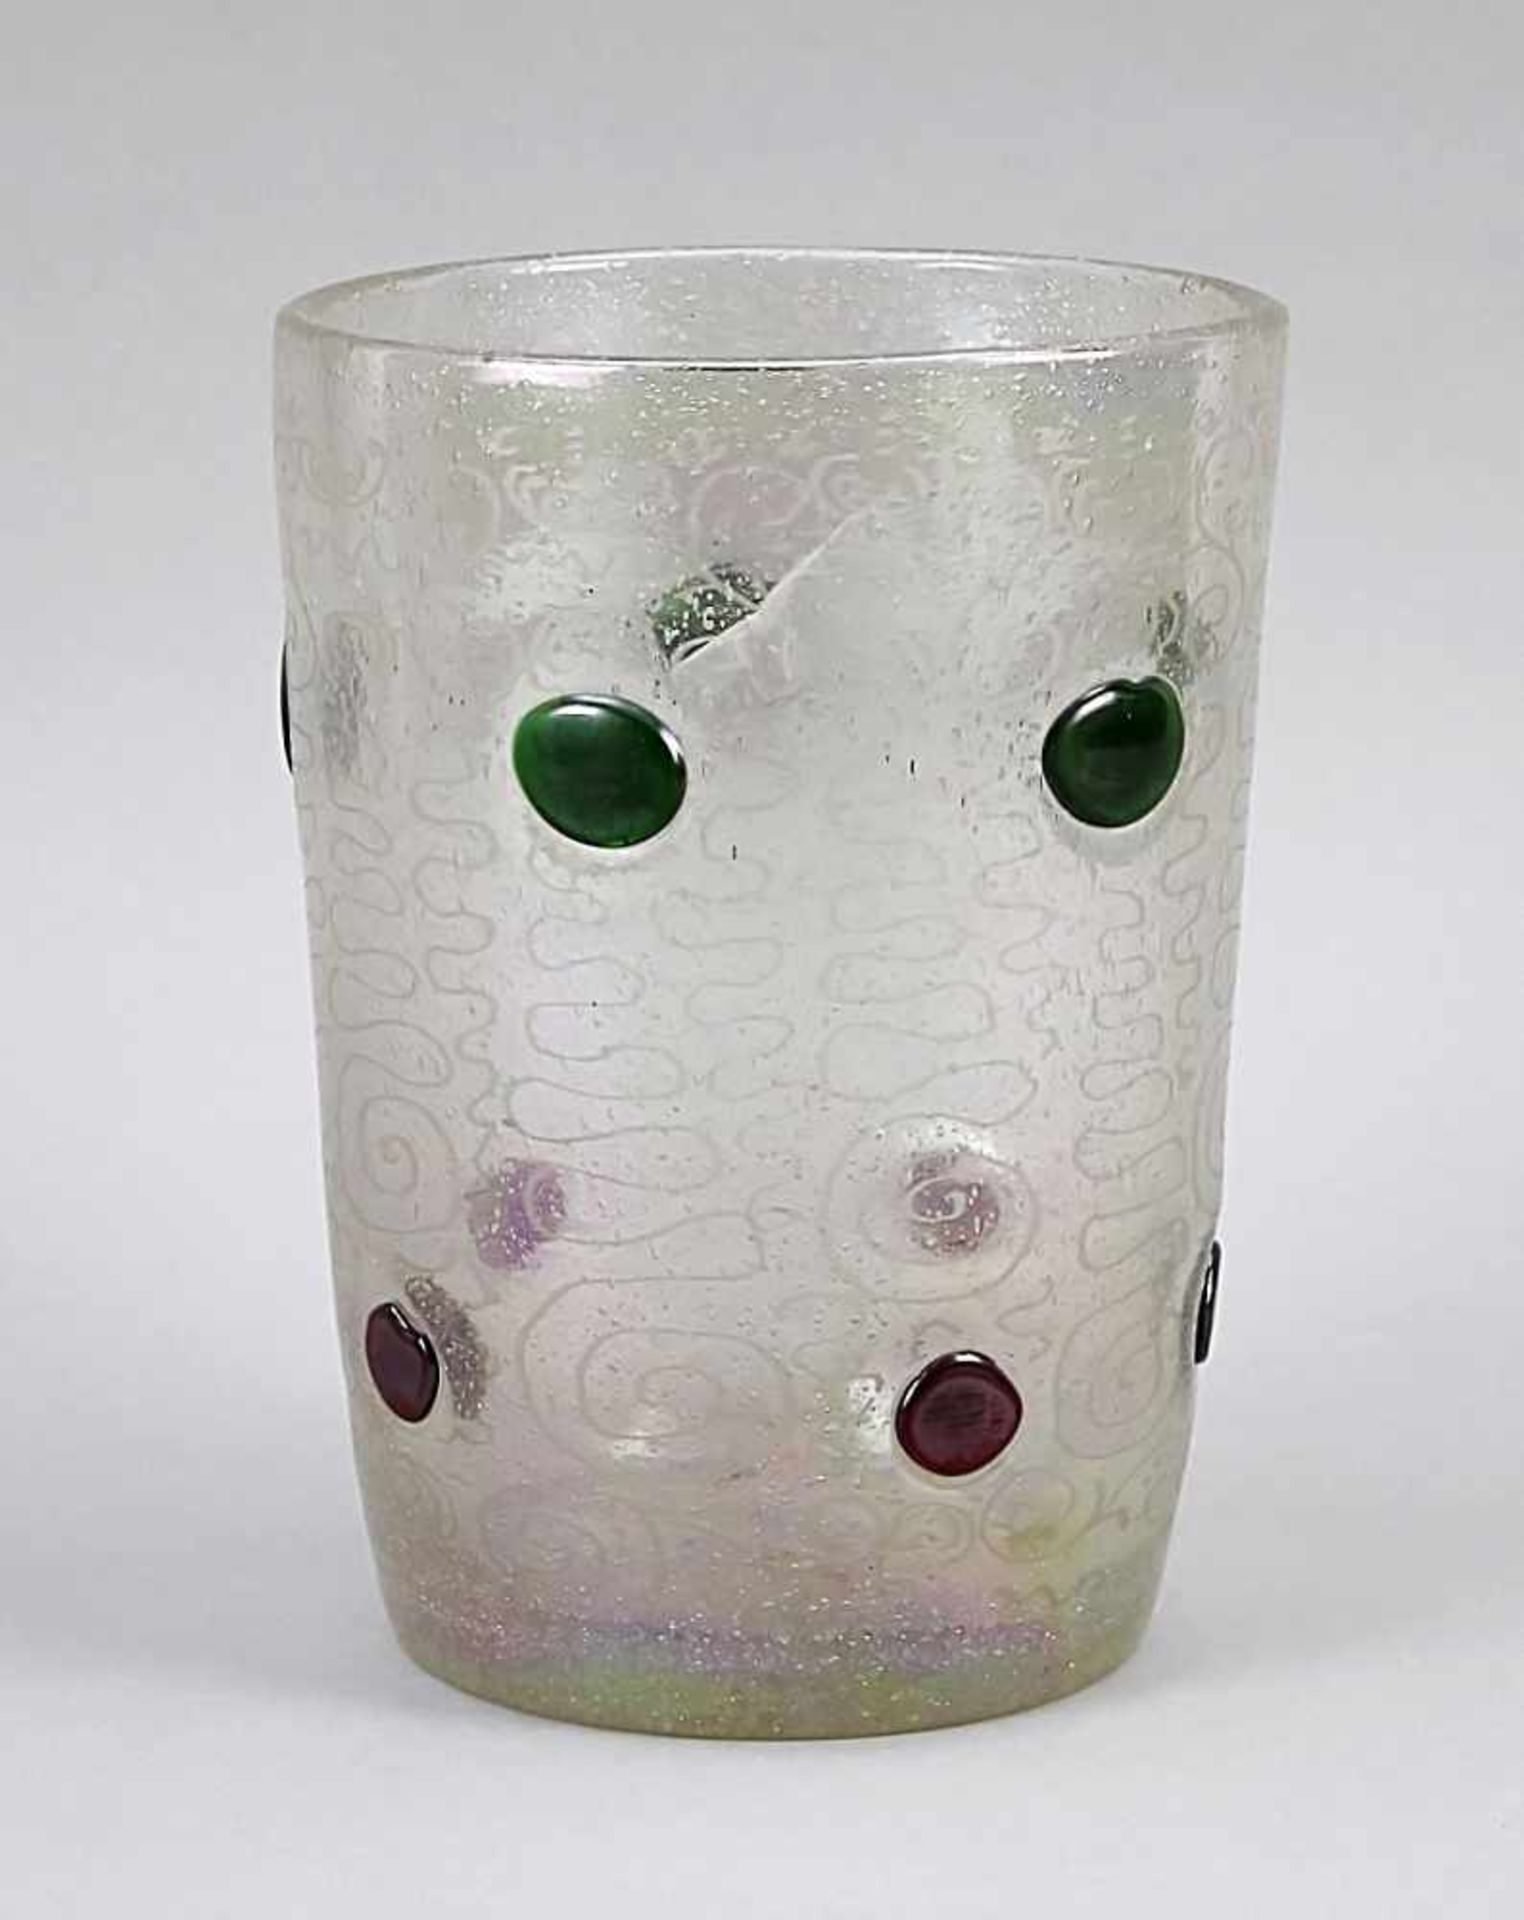 Vase, 20th century, slightly conical shape, clear glass with etched spiral decoration andmelted dots